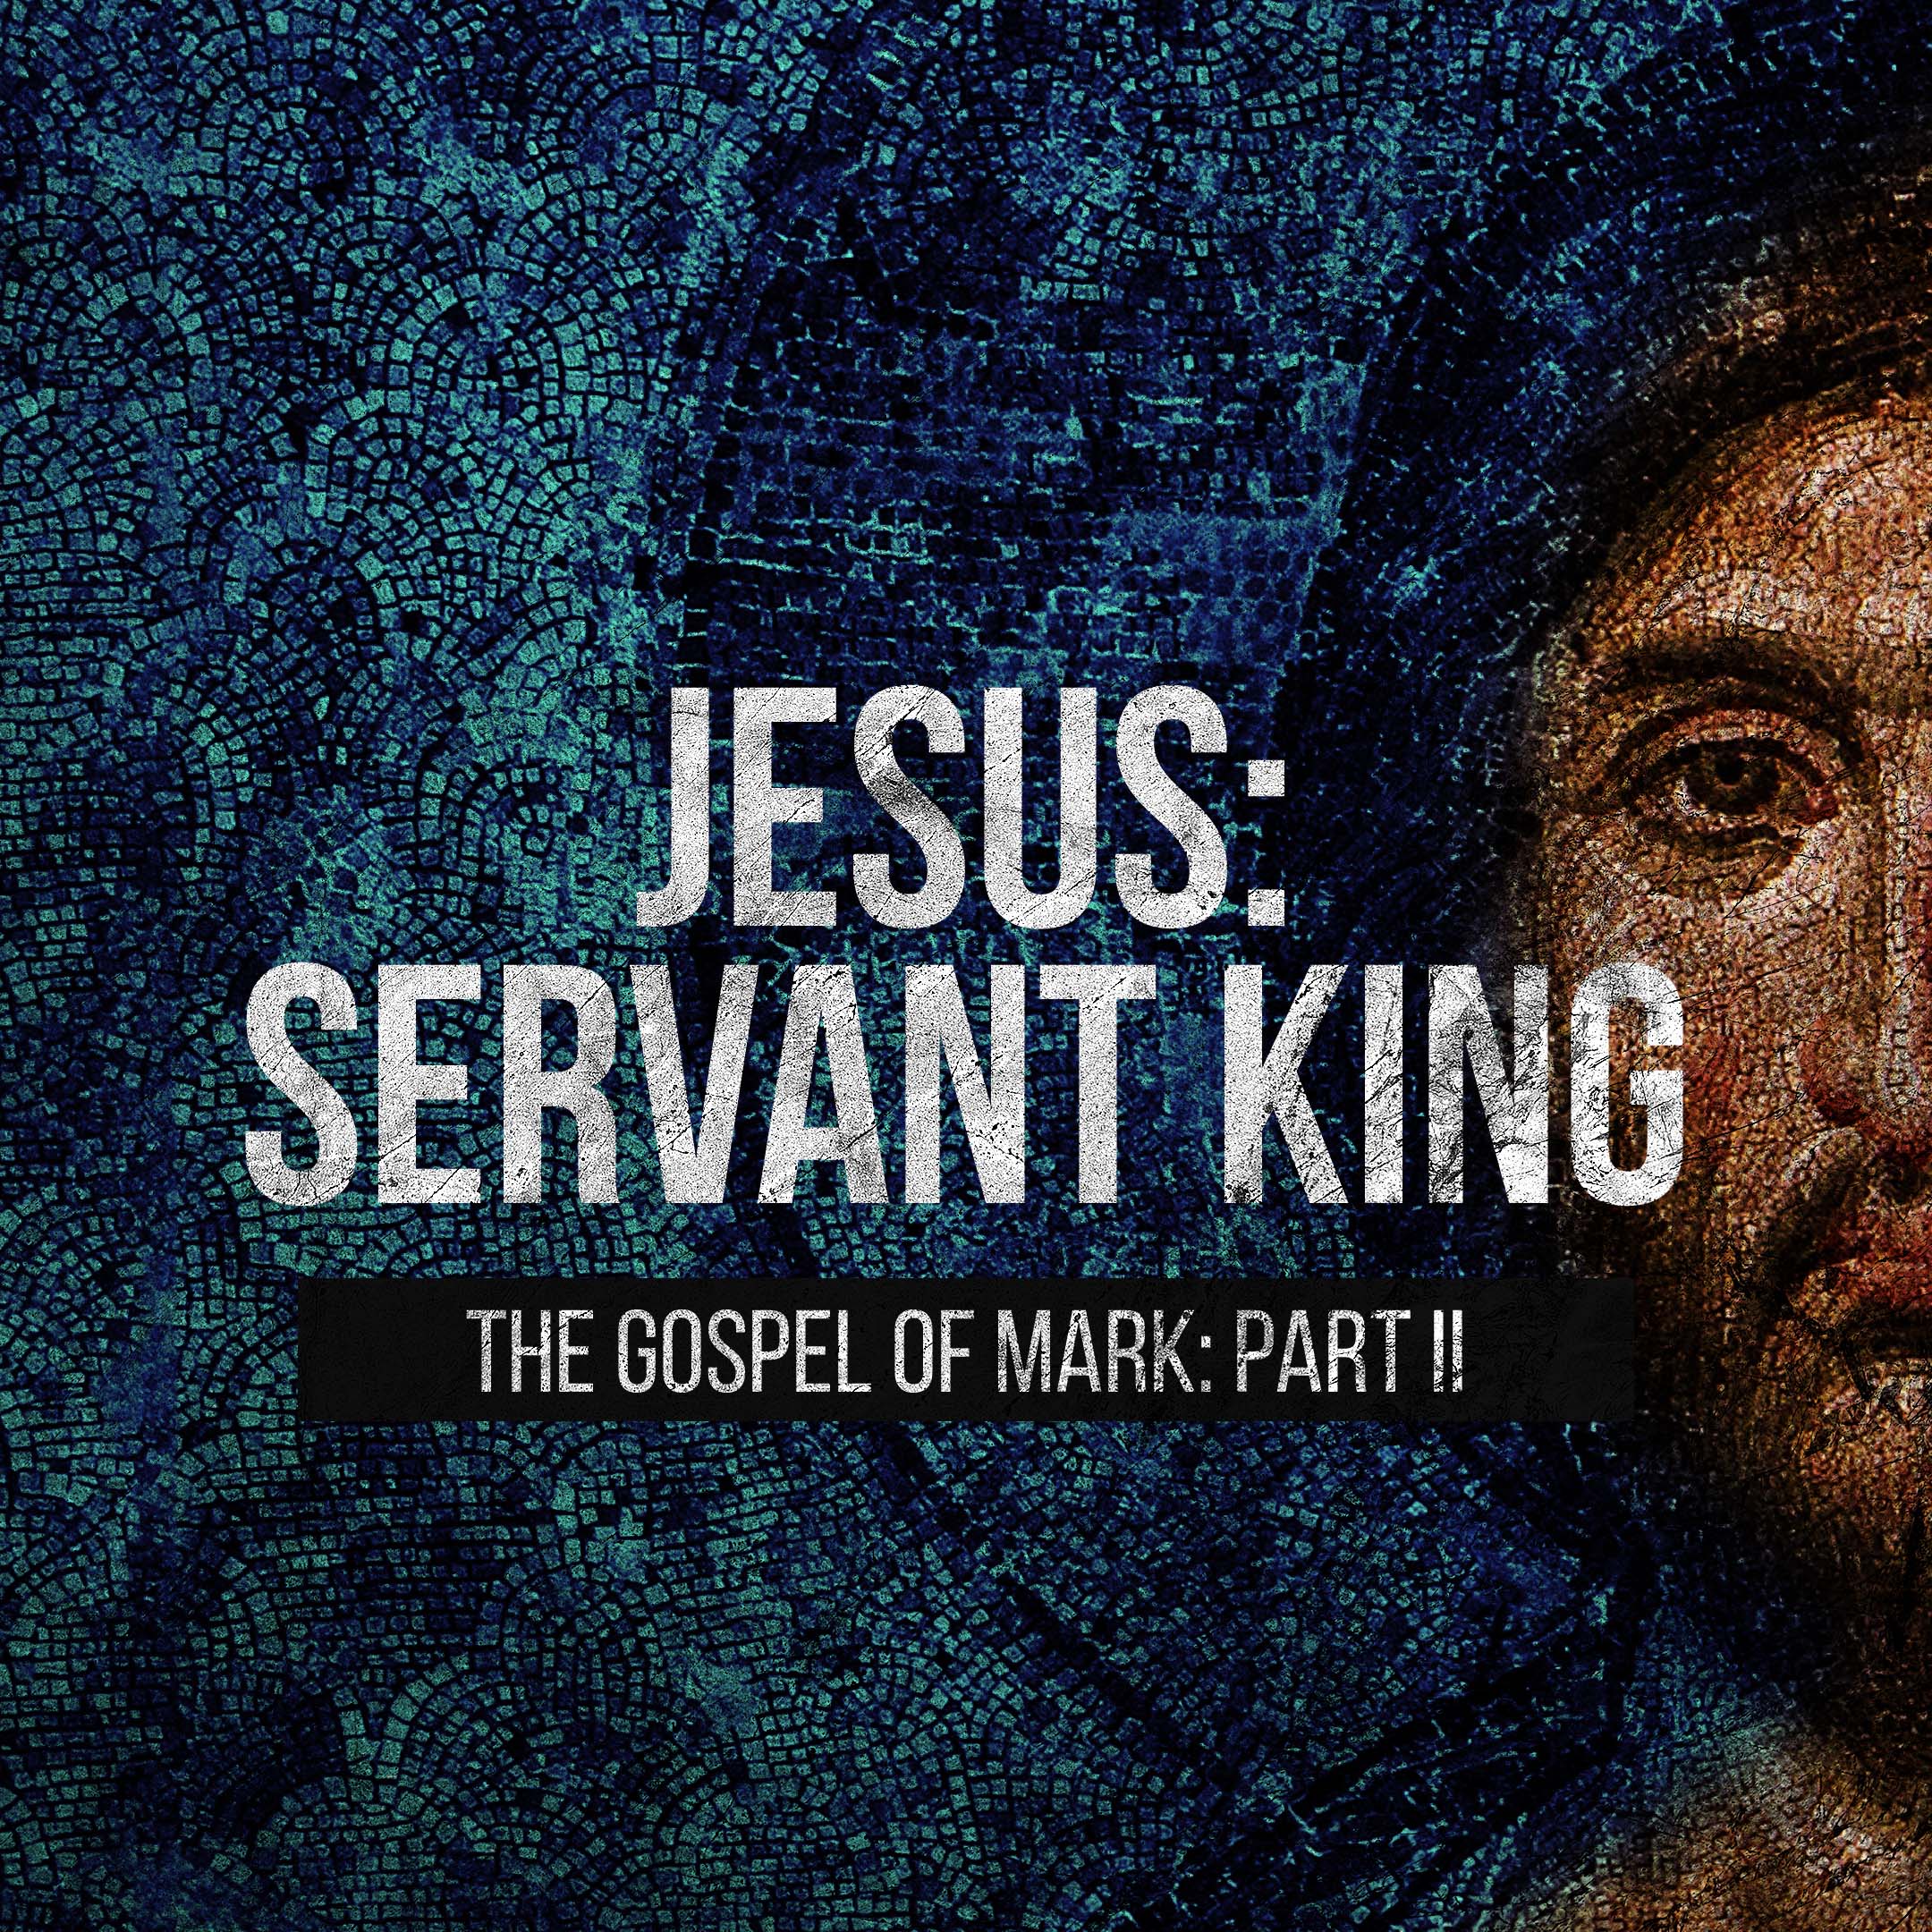 The Book of Mark - Cleansing the Temple - Mark 11:15-19